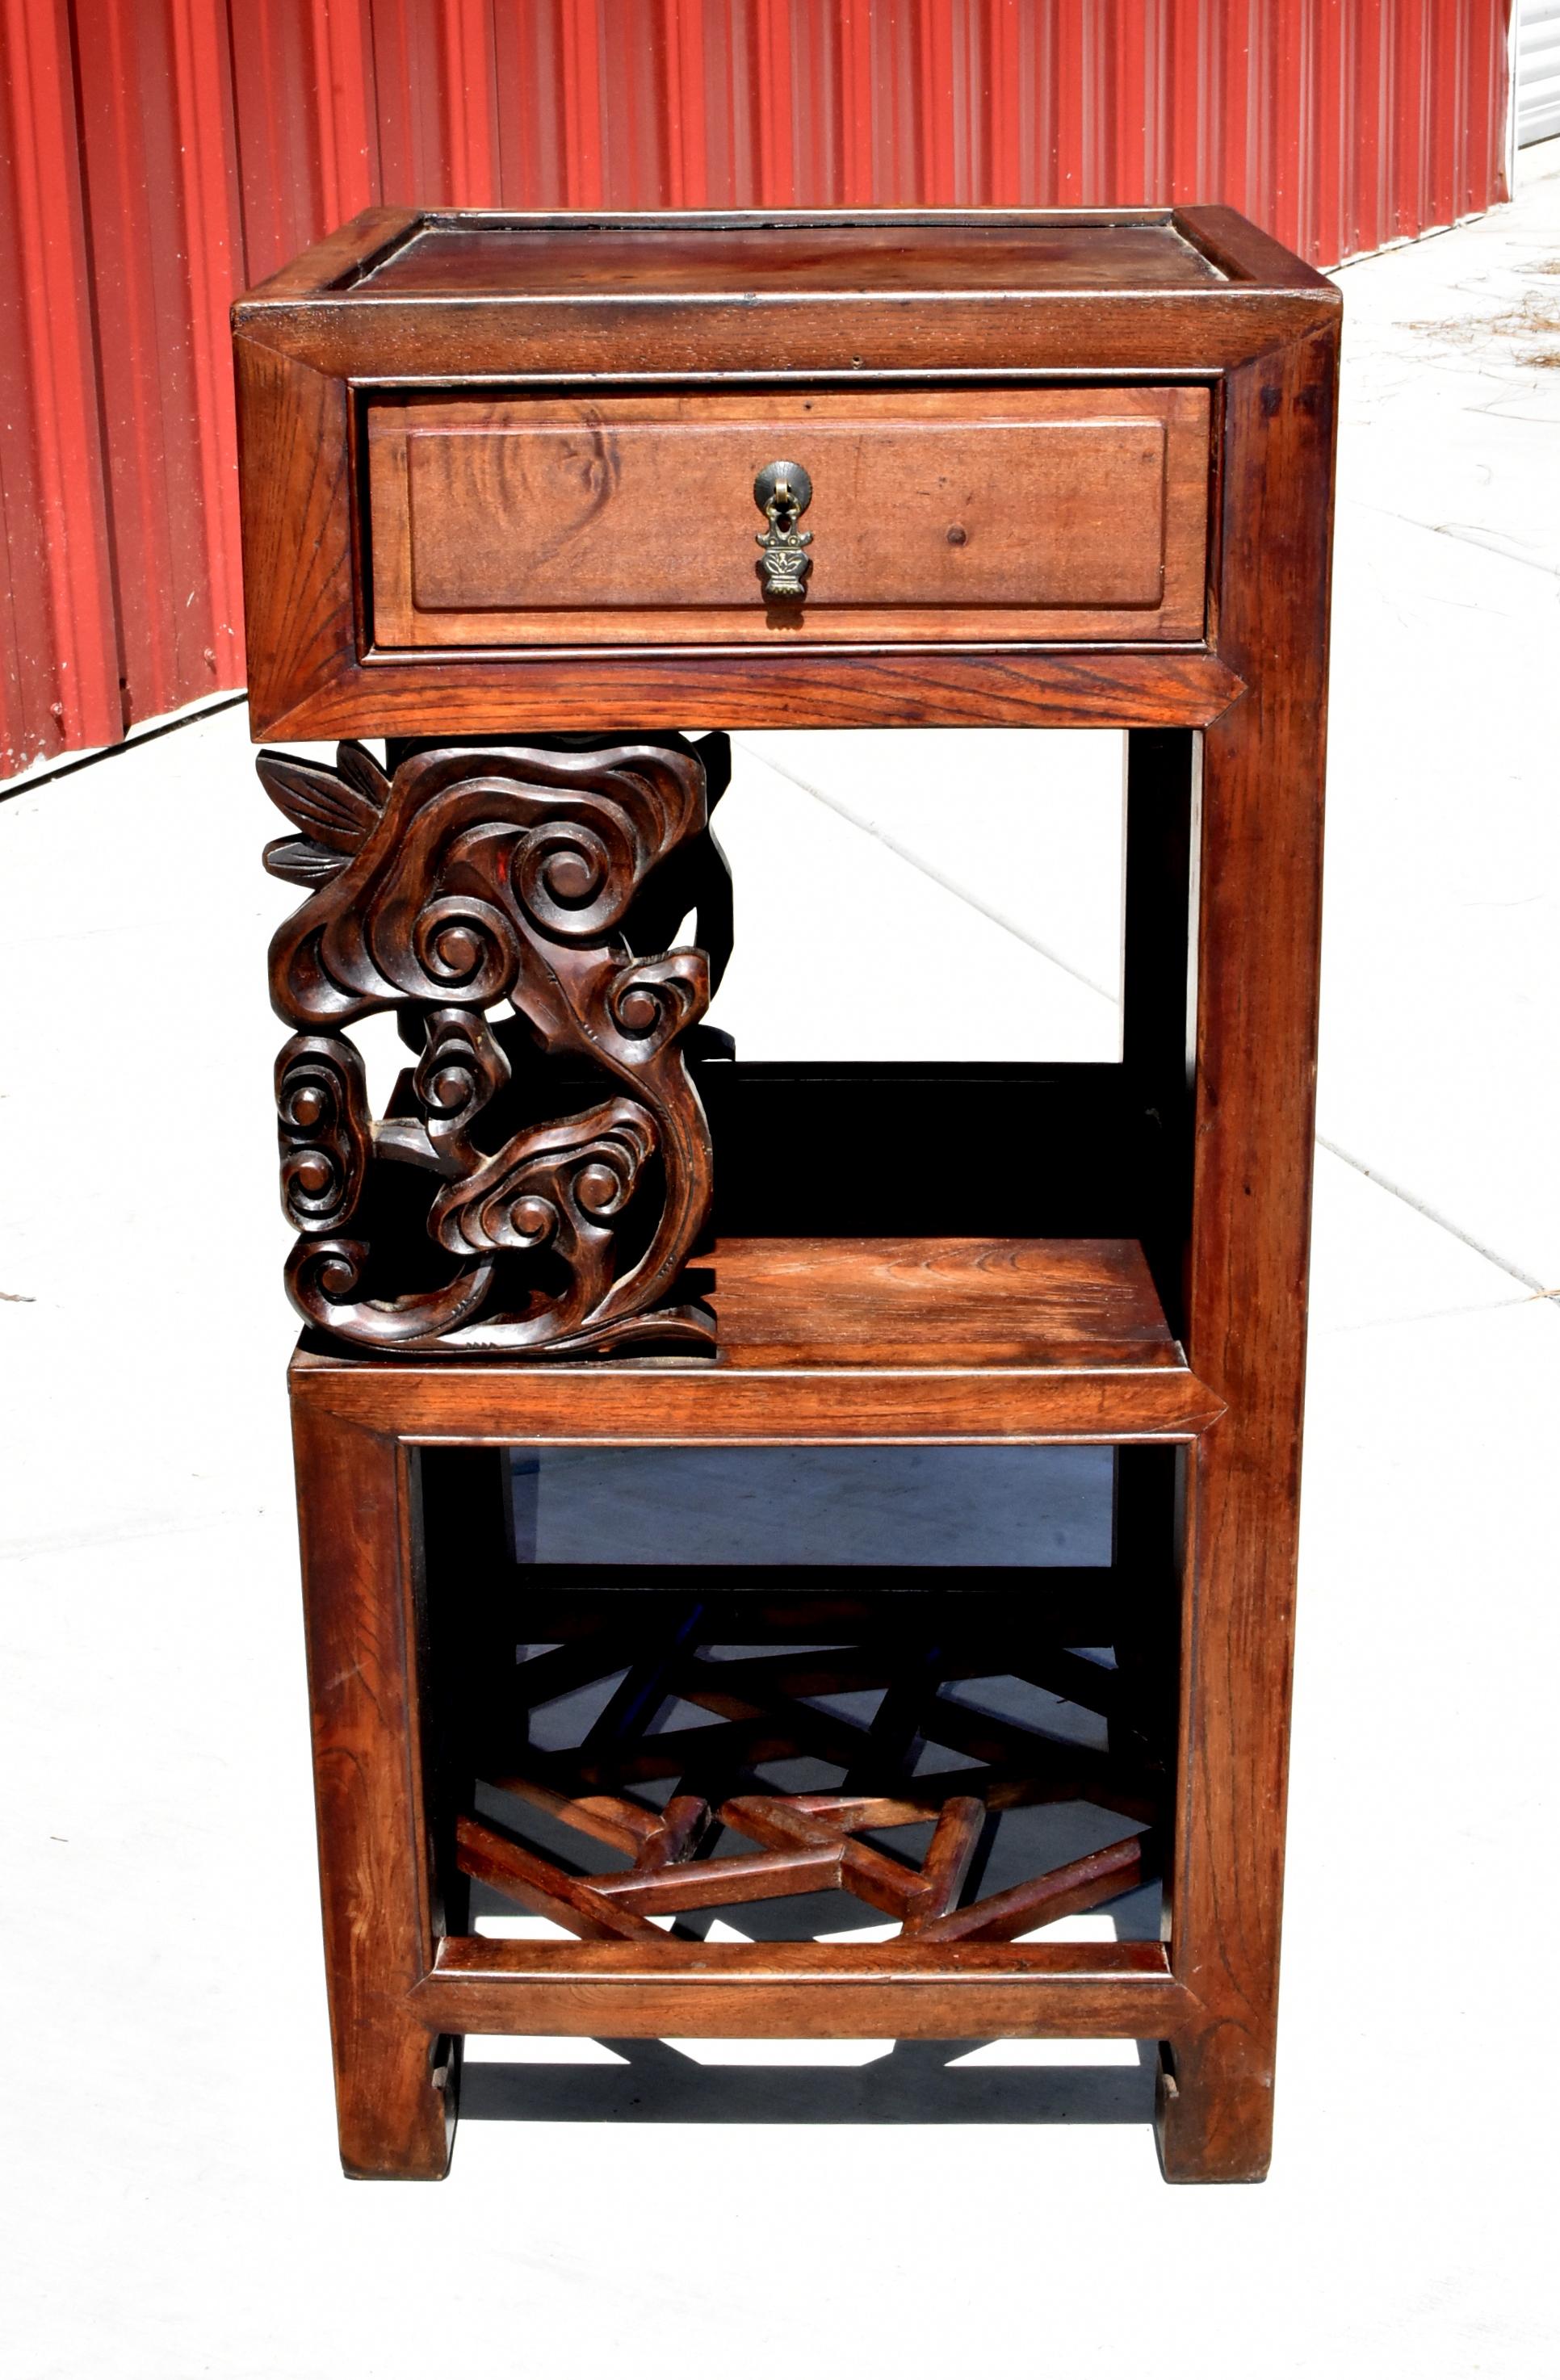 A beautiful Chinese antique side table. The table has a square inset top, a full-length drawer, hand carved Lin Zhi motif front panel, a solid mid shelf, an open compartment and a fantastic ice-crackle patterned base that is constructed by joining